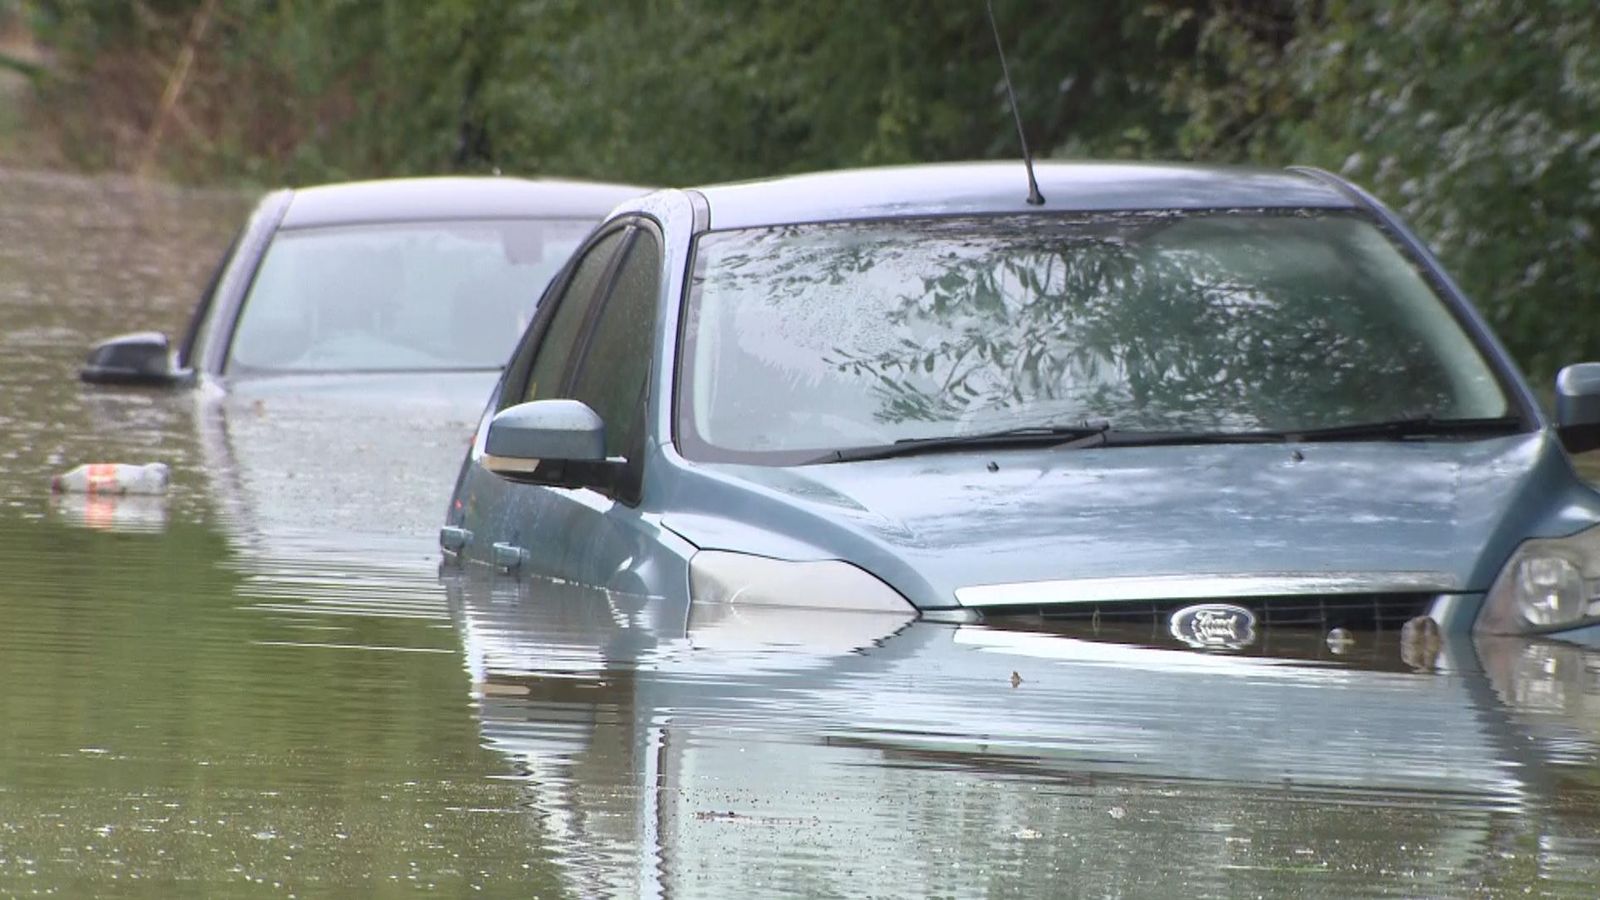 Major flooding could continue until Tuesday after Storm Babet, Environment Agency warns